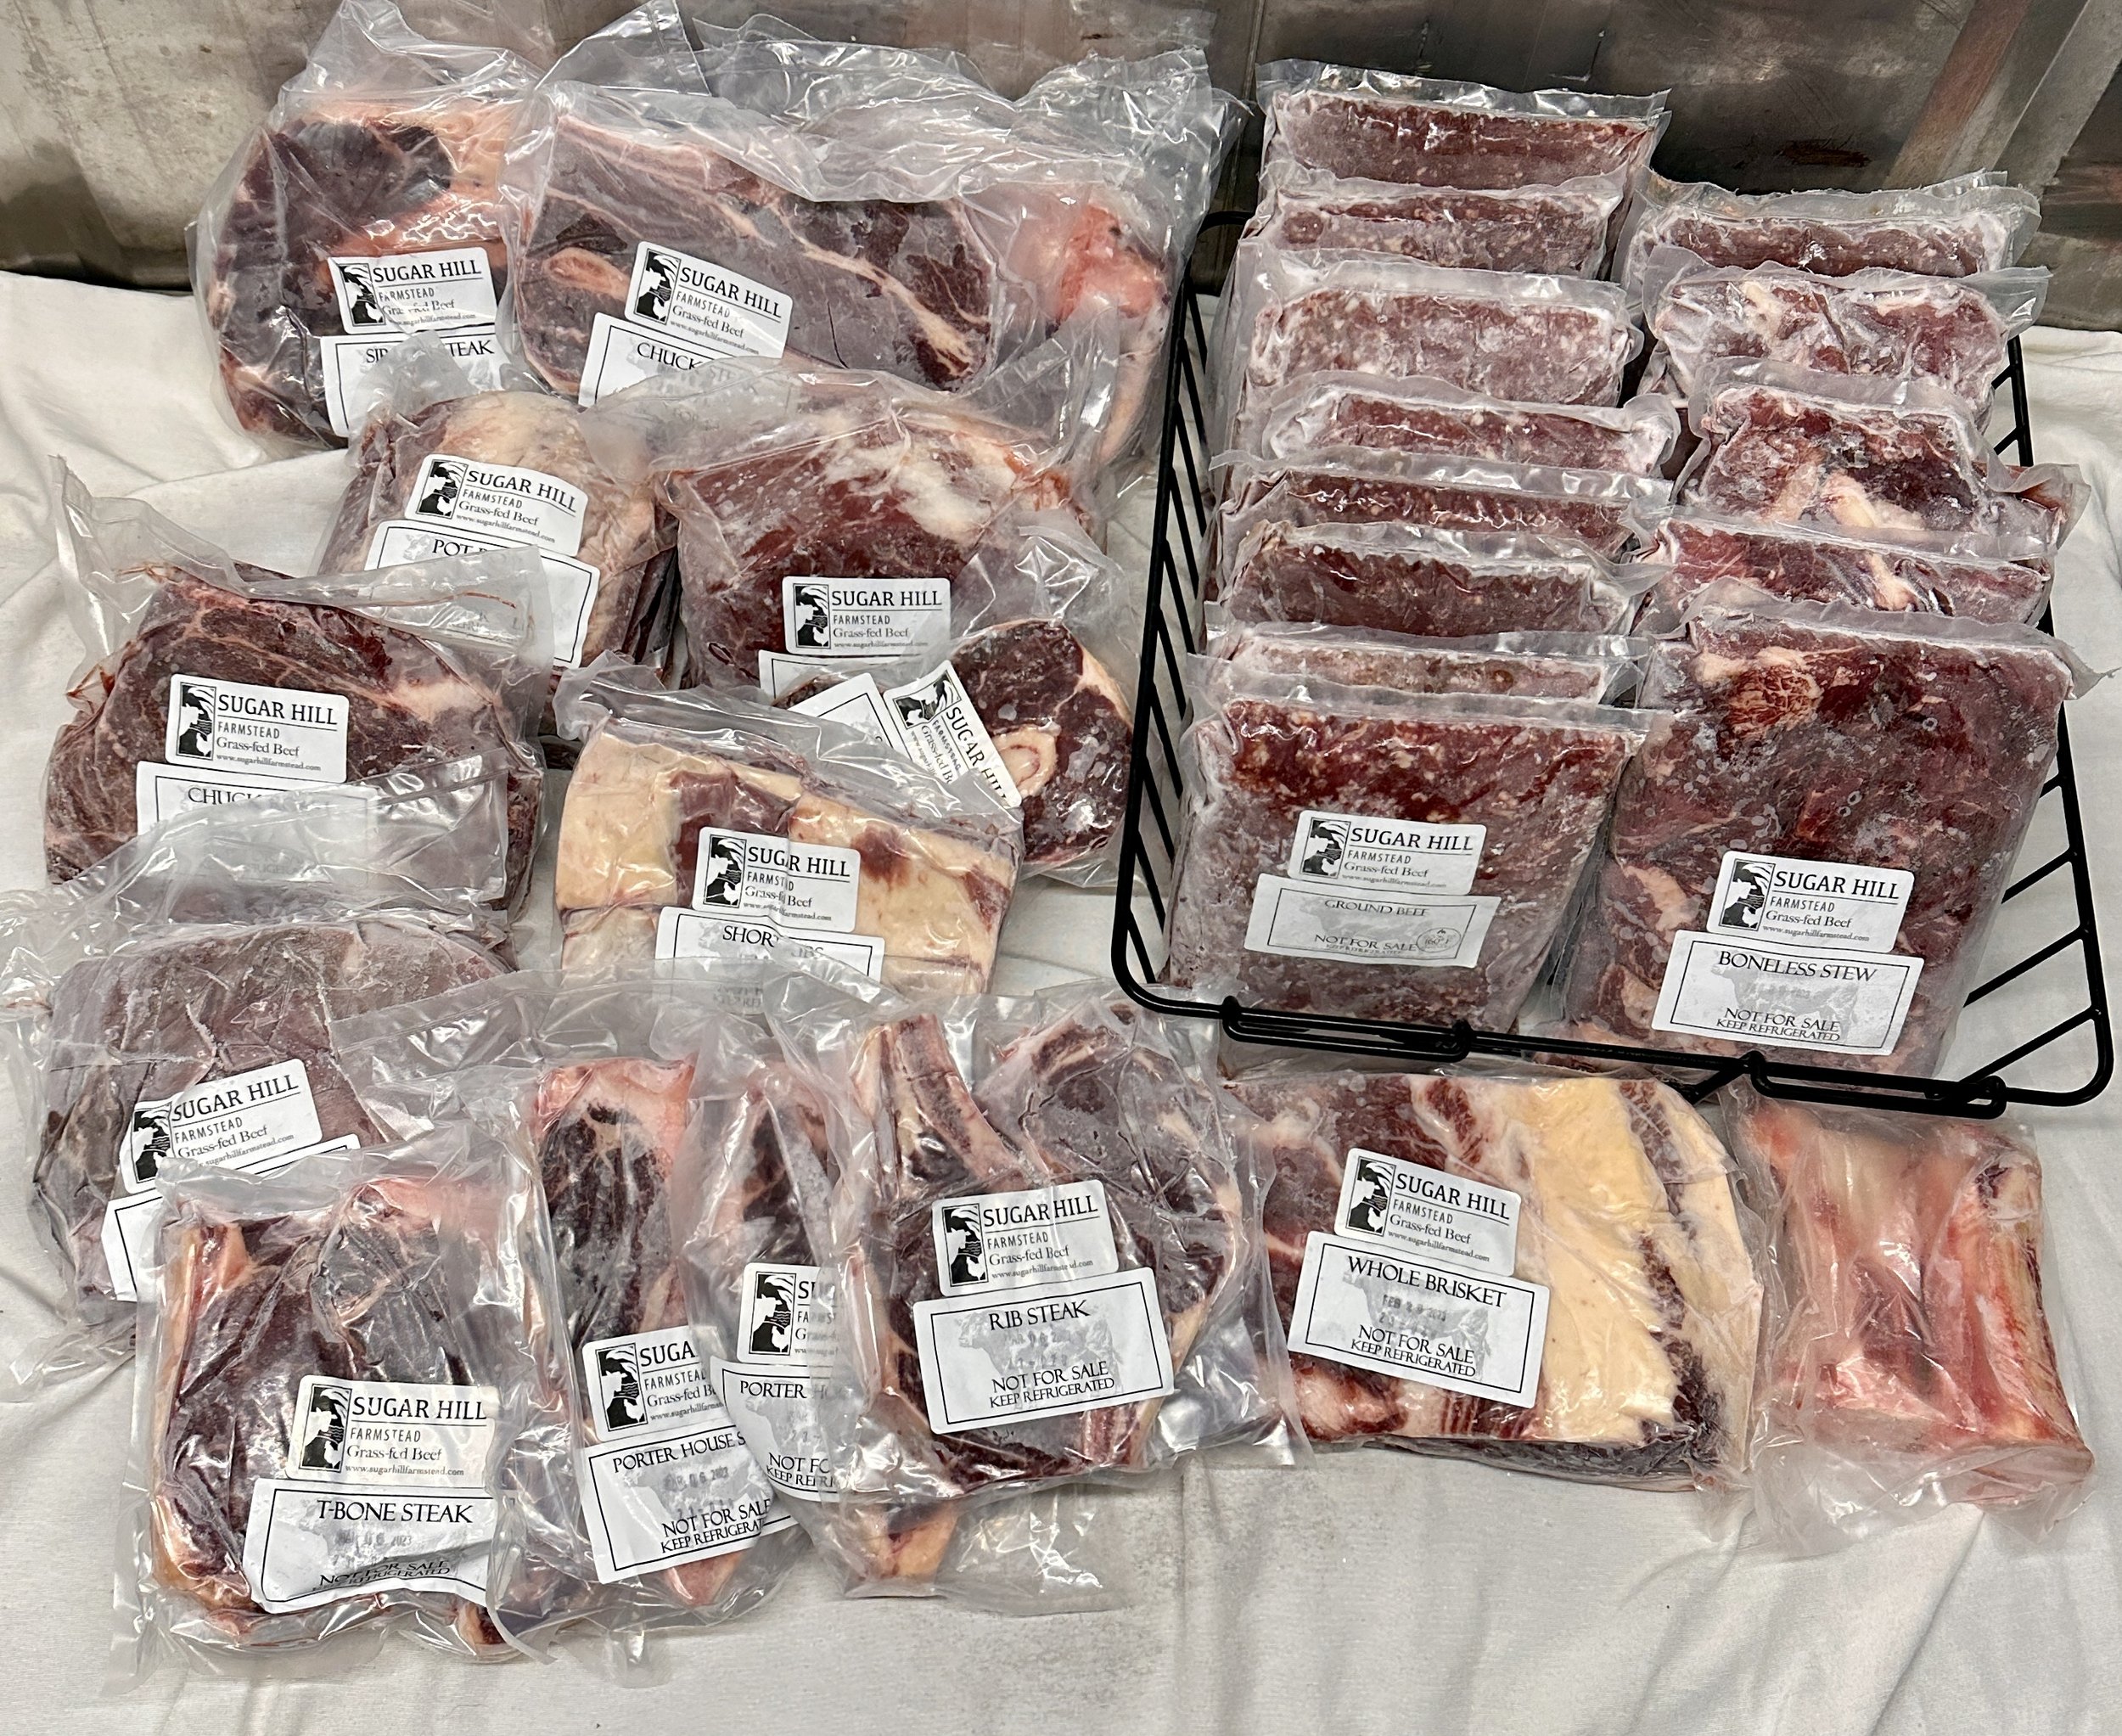 How many pounds of meat will my freezer hold? — Sugar Hill Farmstead